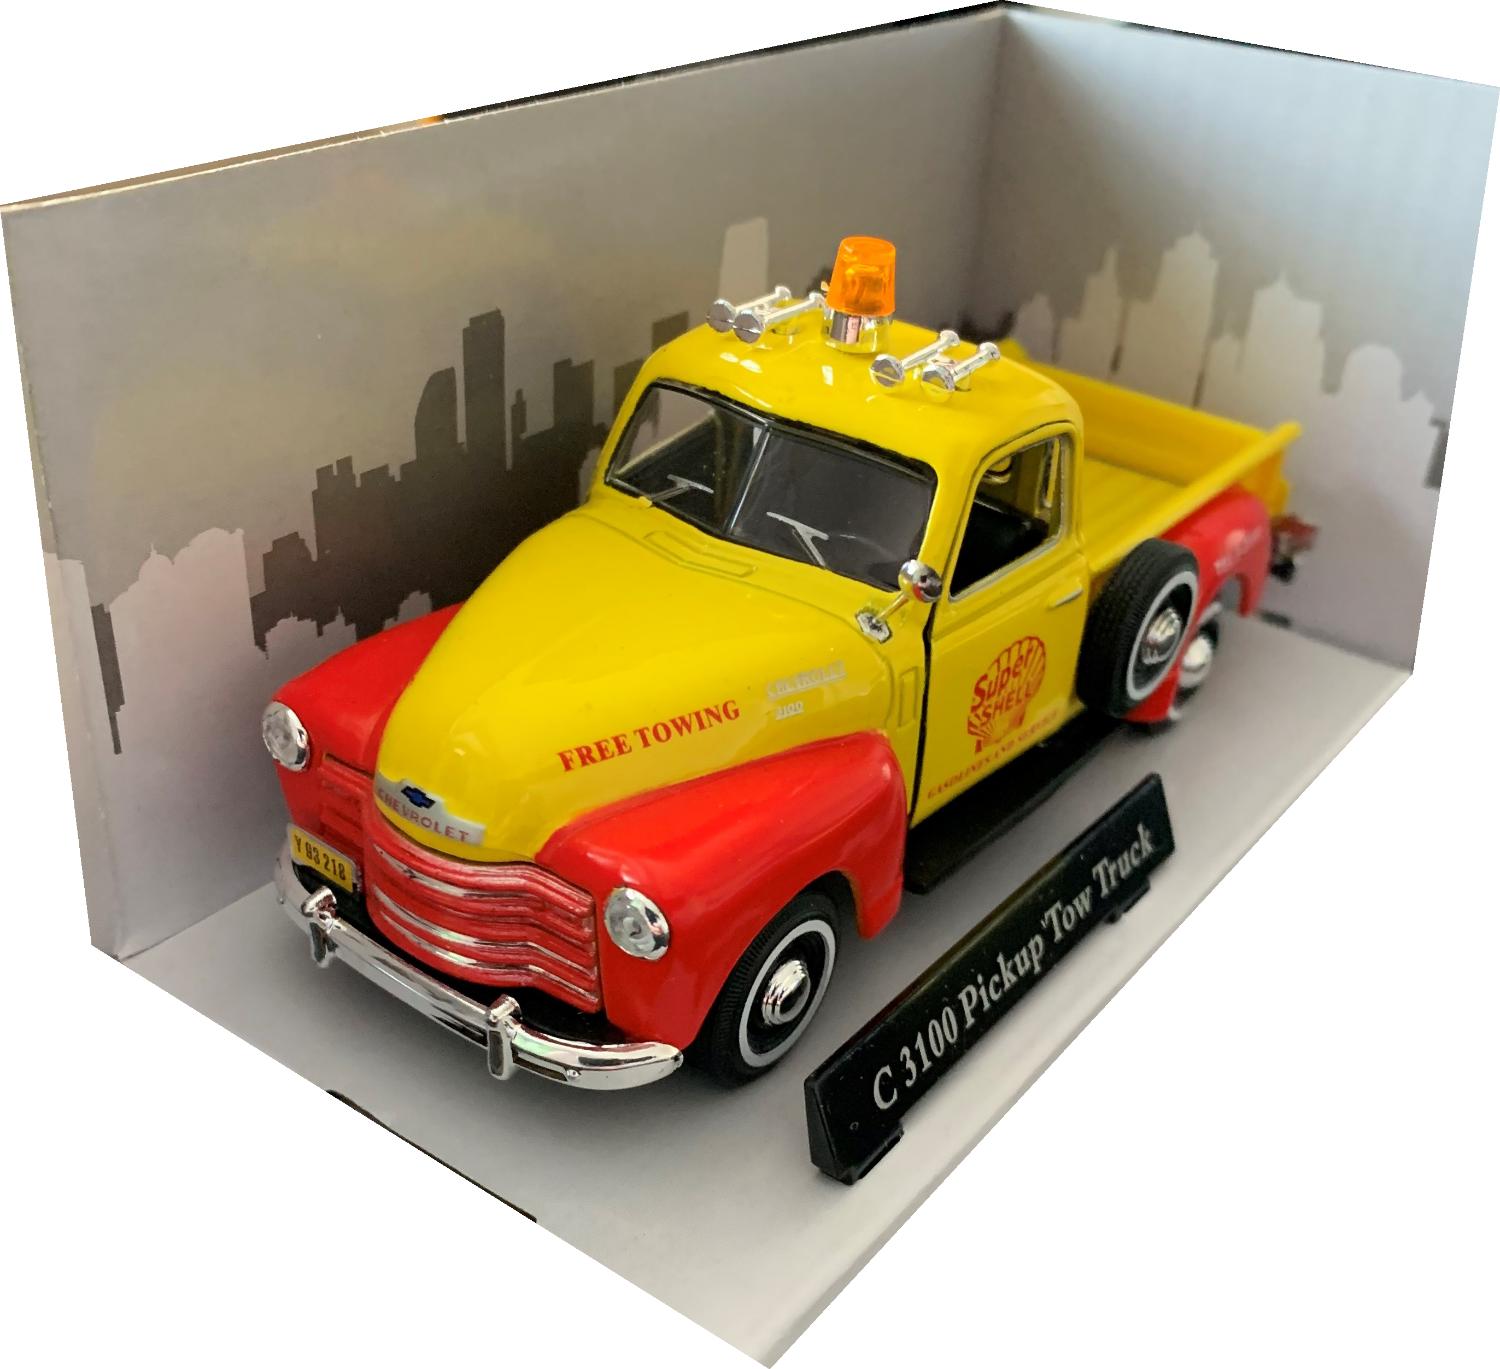 Chevrolet C1300 Breakdown Tow Truck in yellow / red 1:43 scale model from Cararama